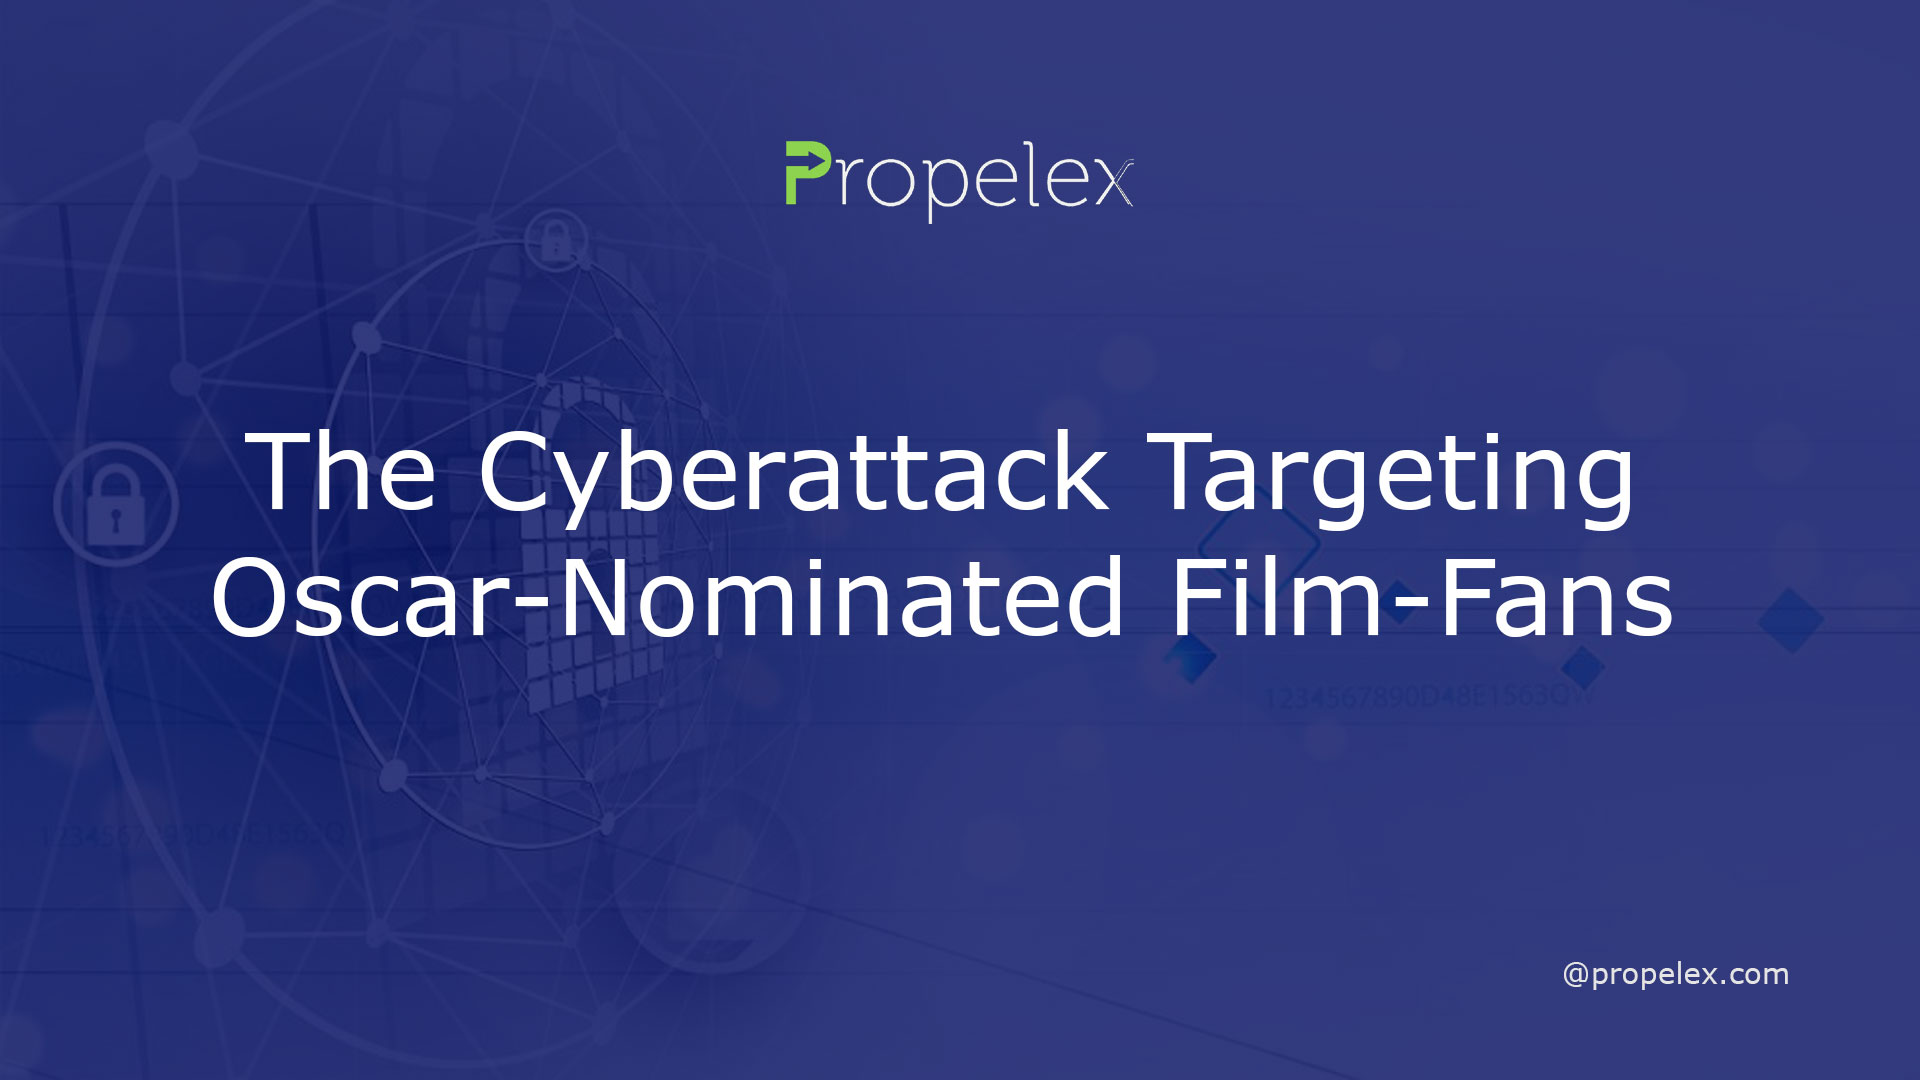 The Cyberattack Targeting Oscar-Nominated Film-Fans